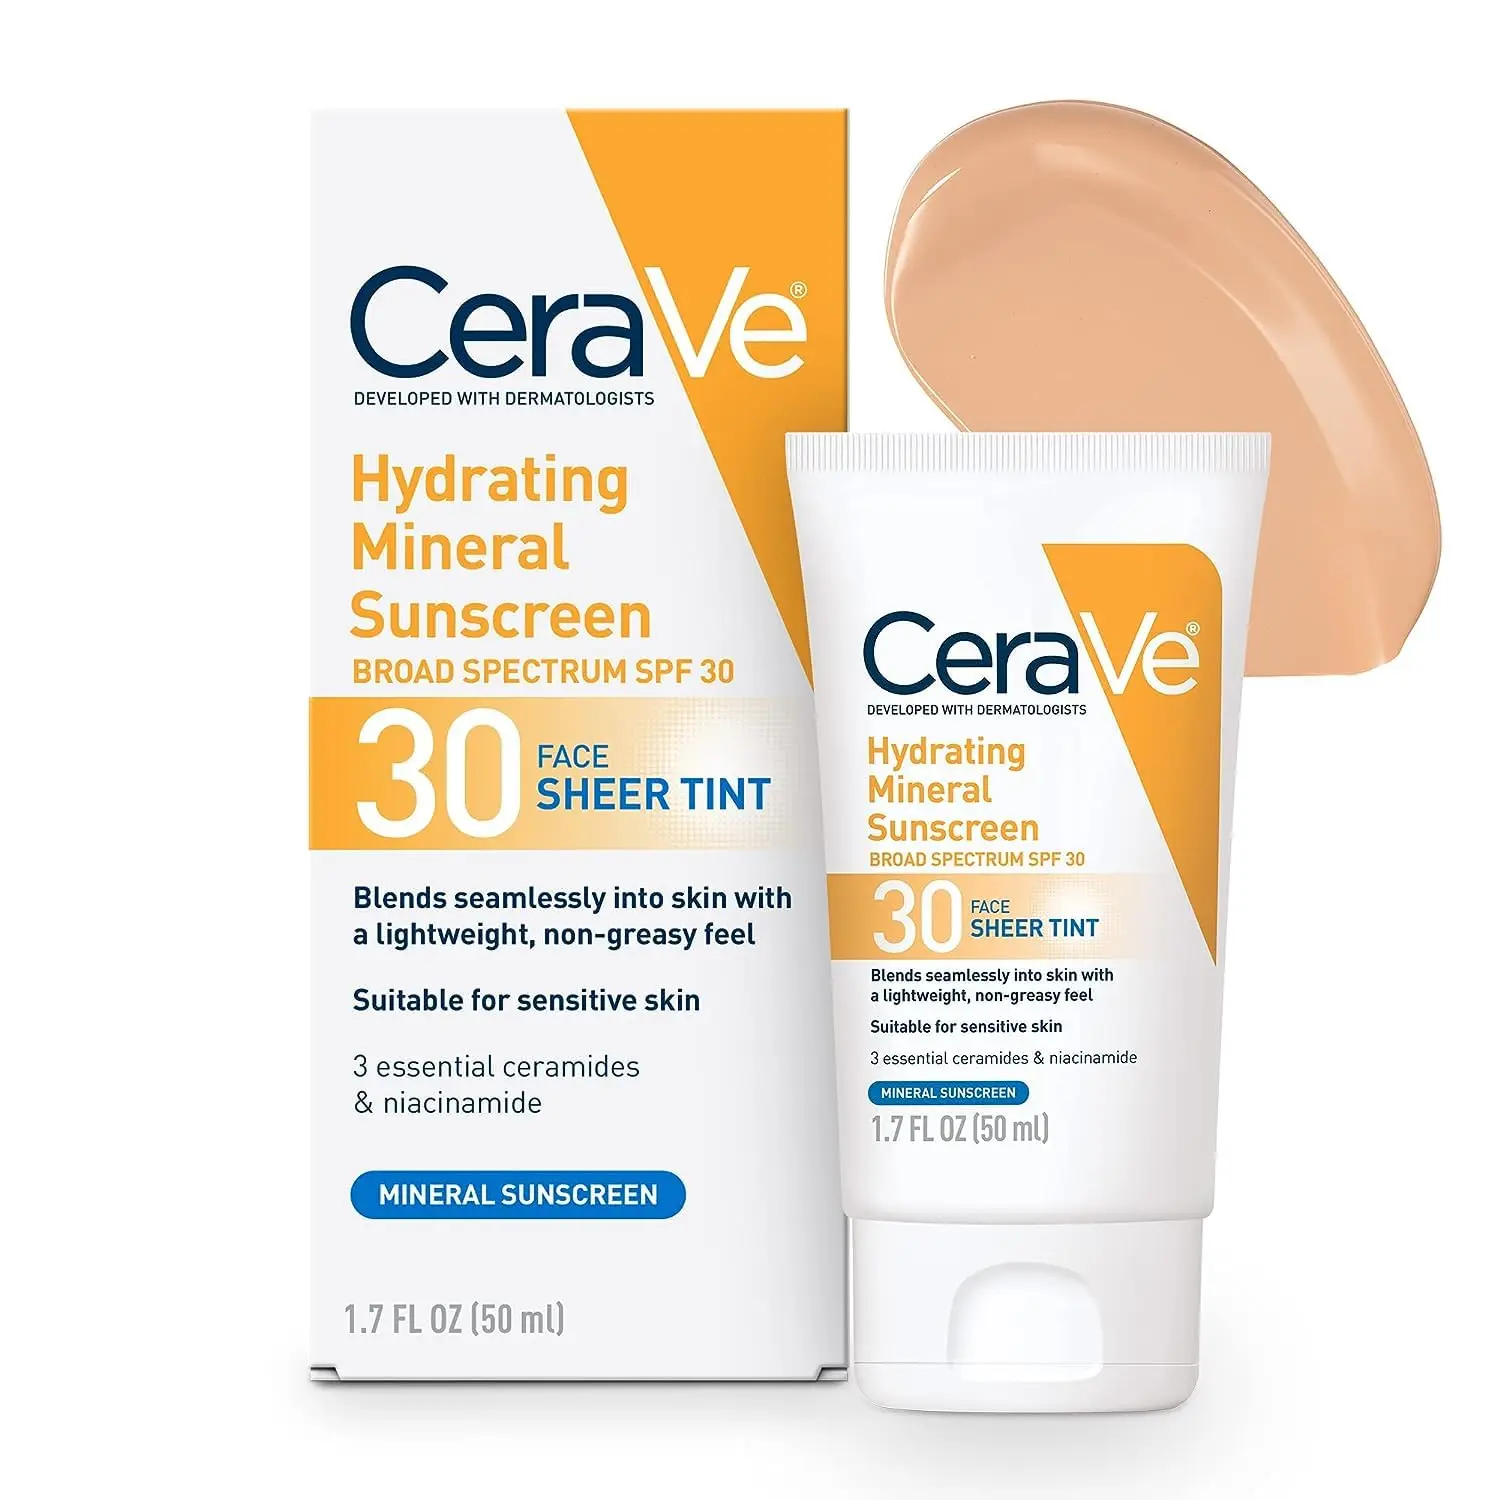 

CeraVe Tinted Sunscreen with SPF 30 | Hydrating Mineral Sunscreen For Face Sheer Tint With soothing niacinamide |hyaluronic acid